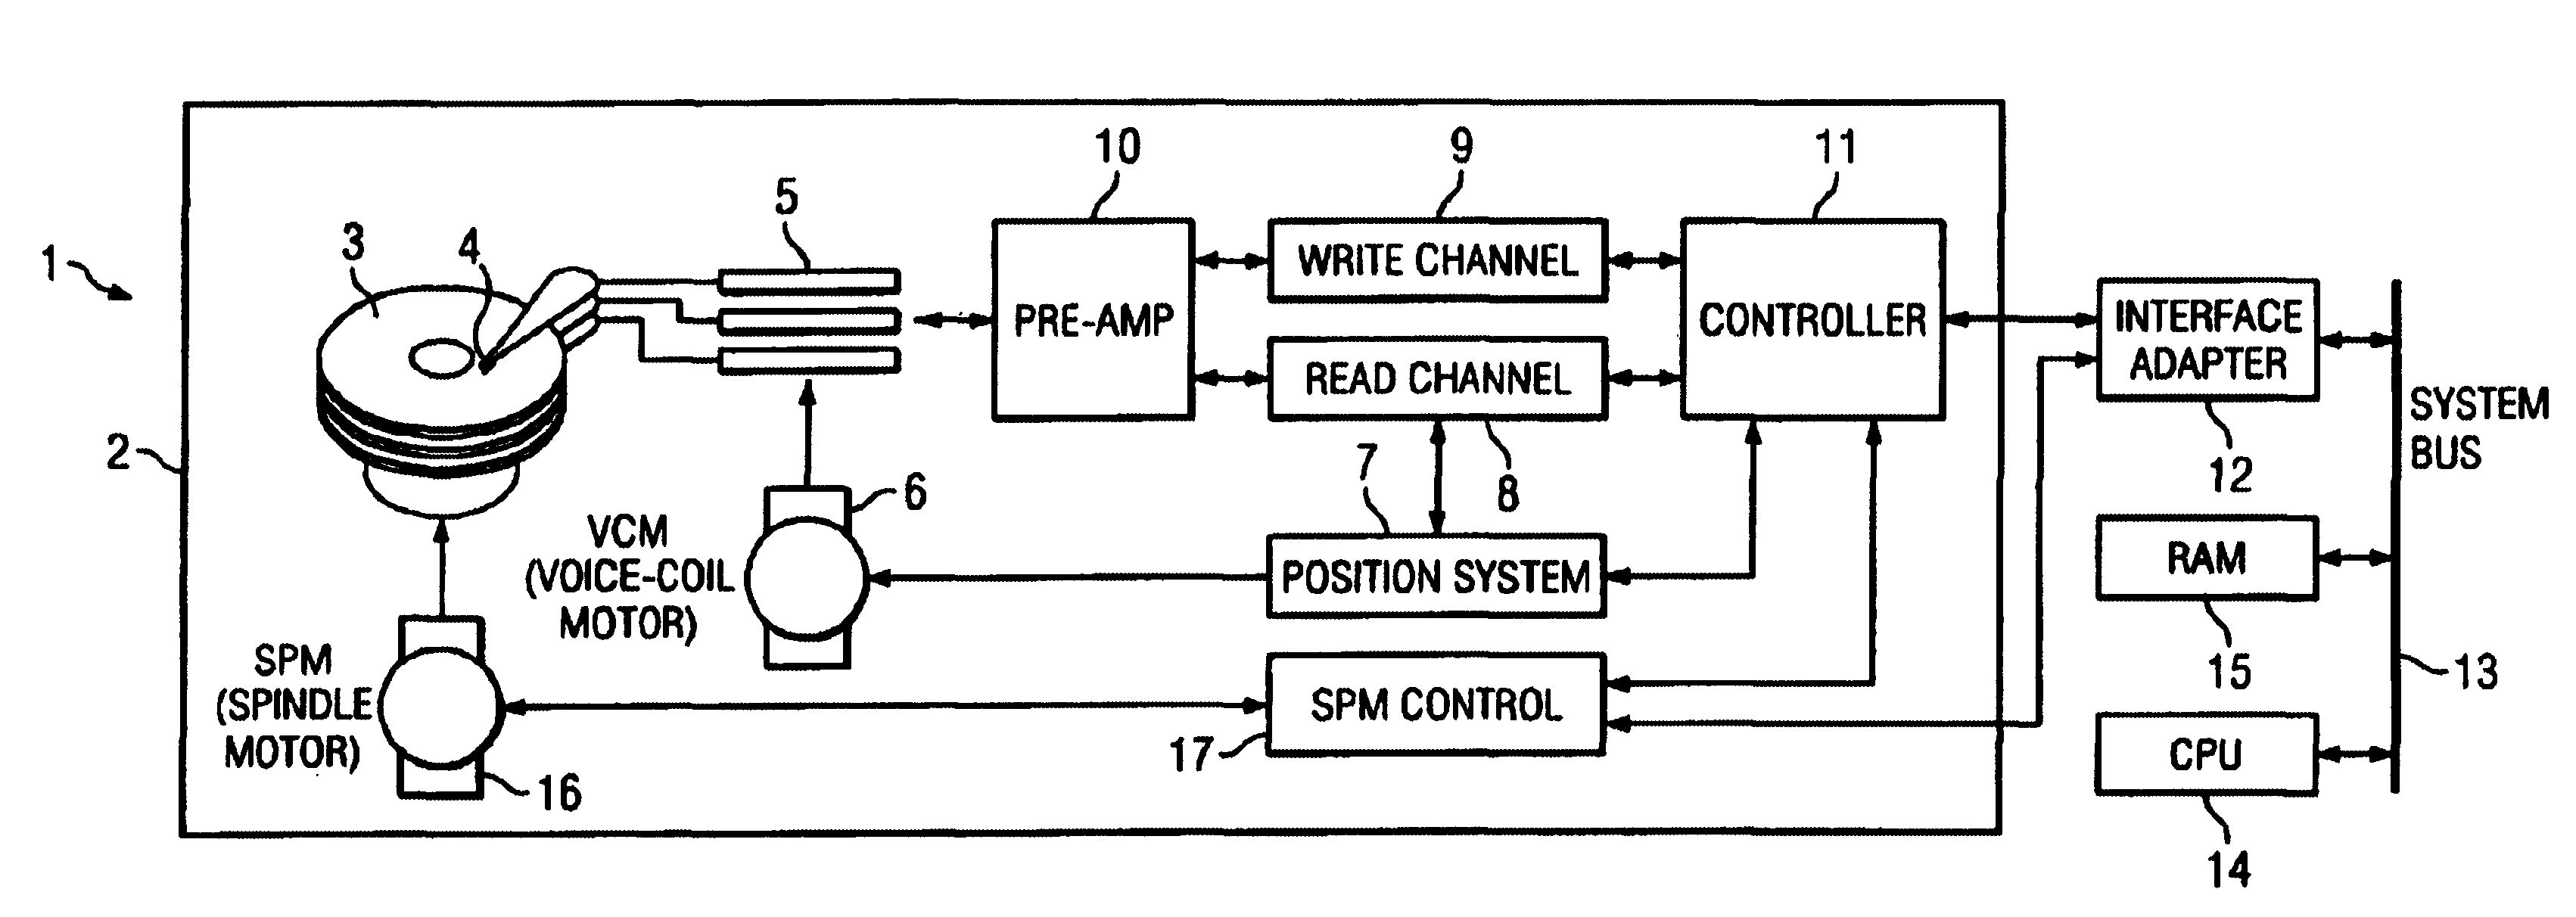 Embedded programmable filter for disk drive velocity control